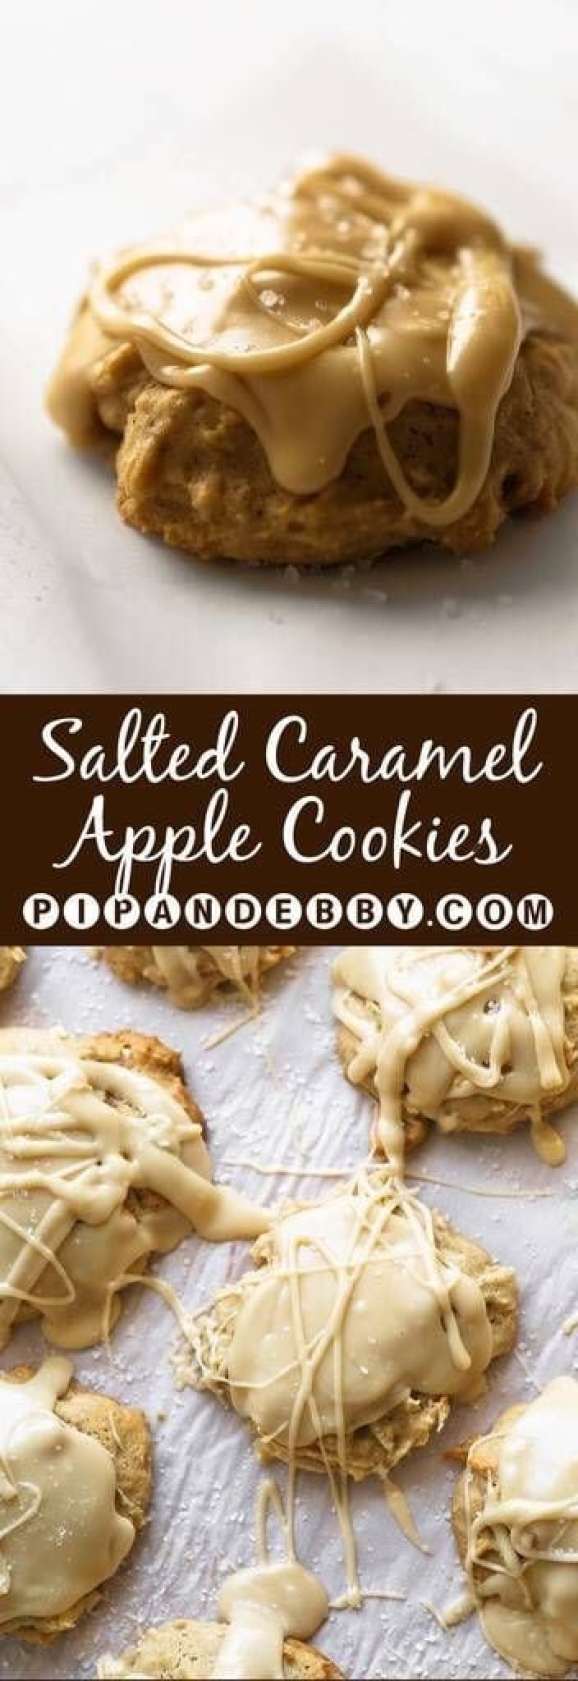 15 Fall Cookie Recipes to Embrace the Best Fall Flavors (Part 1) - fall dessert recipes, Fall Cookies, Fall Cookie Recipes, Fall Cookie, Cookie Recipes